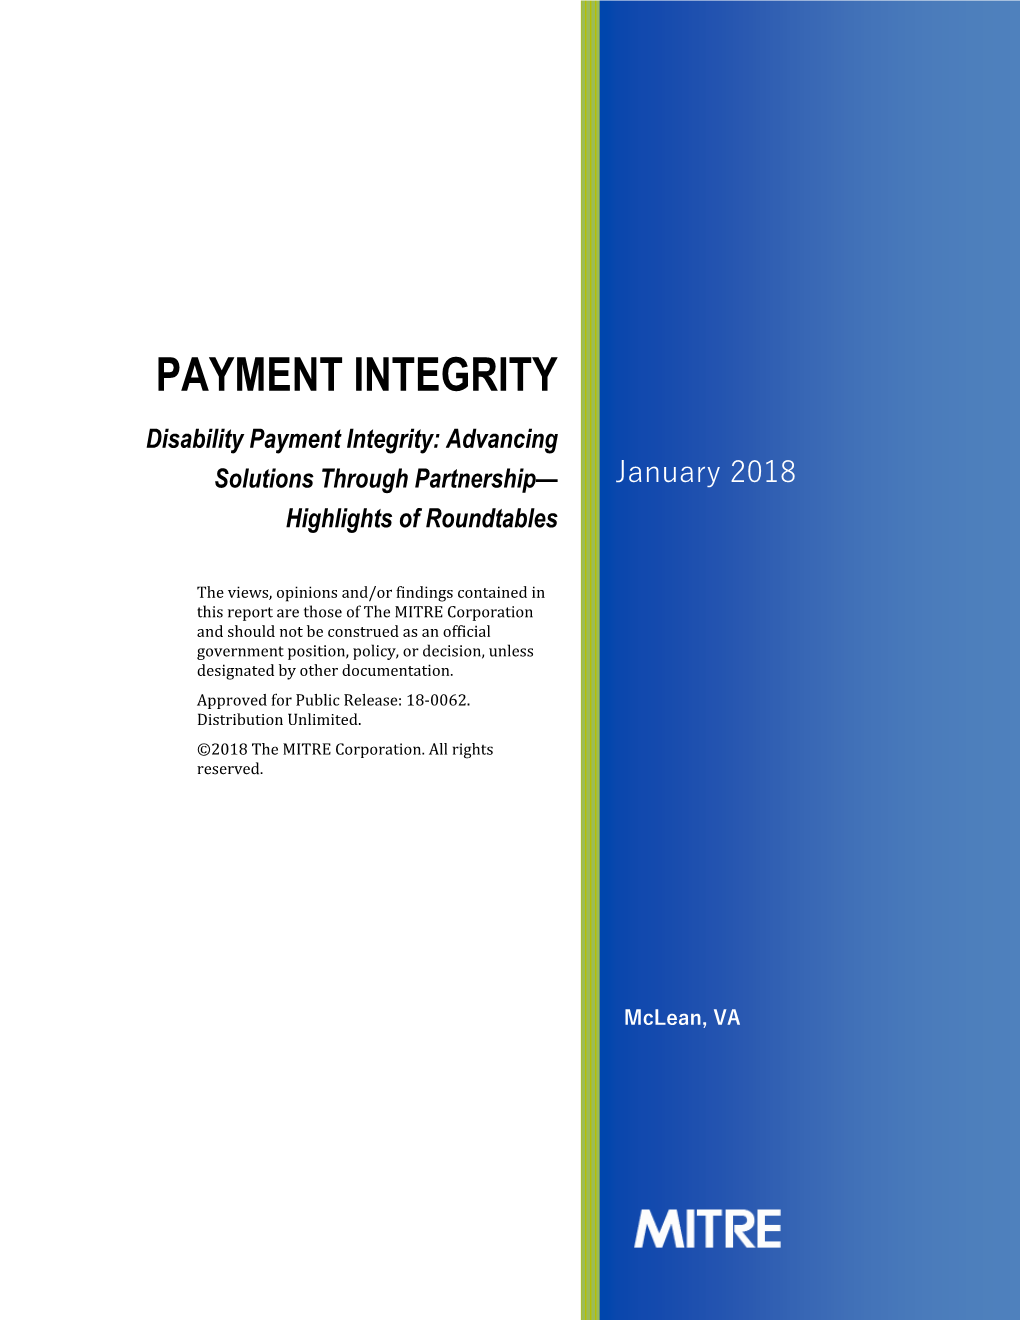 Disability Payment Integrity: Advancing Solutions Through Partnership— January 2018 Highlights of Roundtables